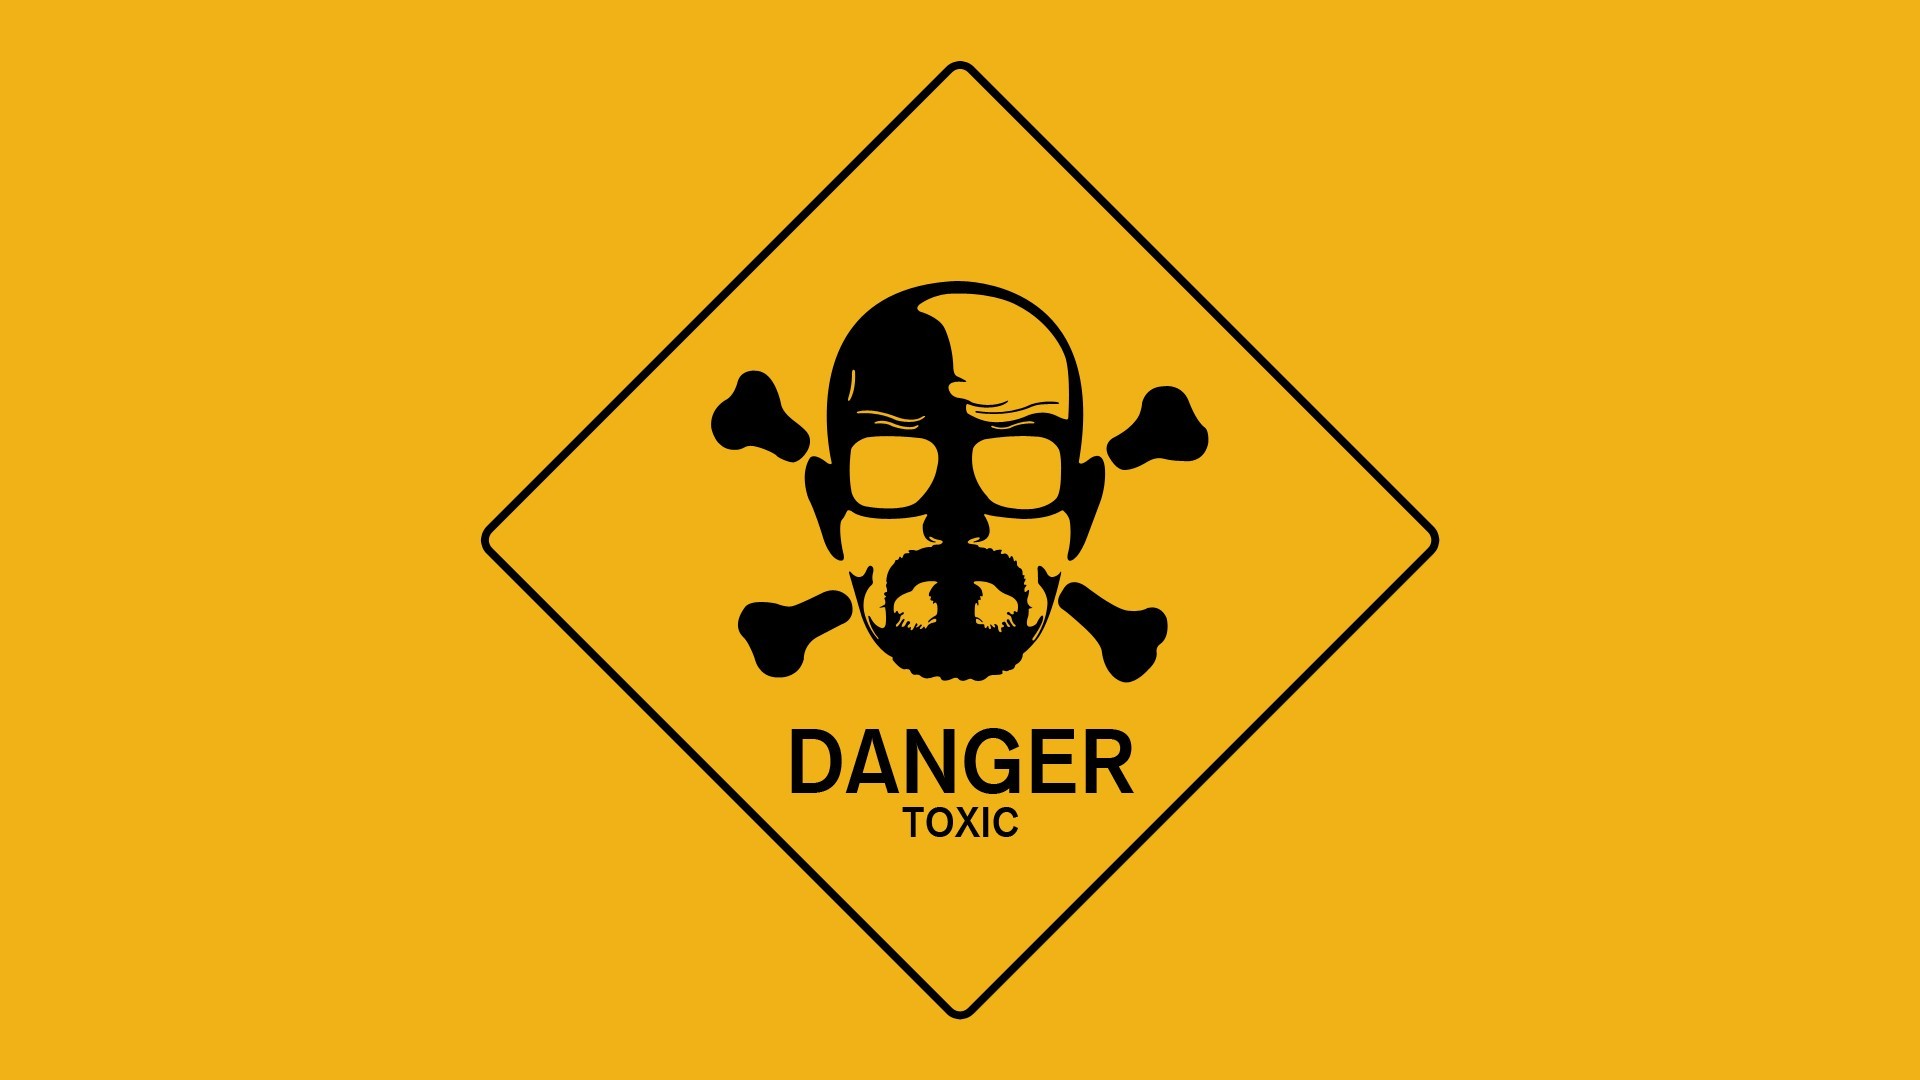 Wallpaper, illustration, minimalism, text, logo, yellow, graphic design, sign, toxic, Breaking Bad, dangerous, brand, angle, area, line, symbol, graphics, 1920x1080 px, computer wallpaper, font, signage 1920x1080 Wallpaper